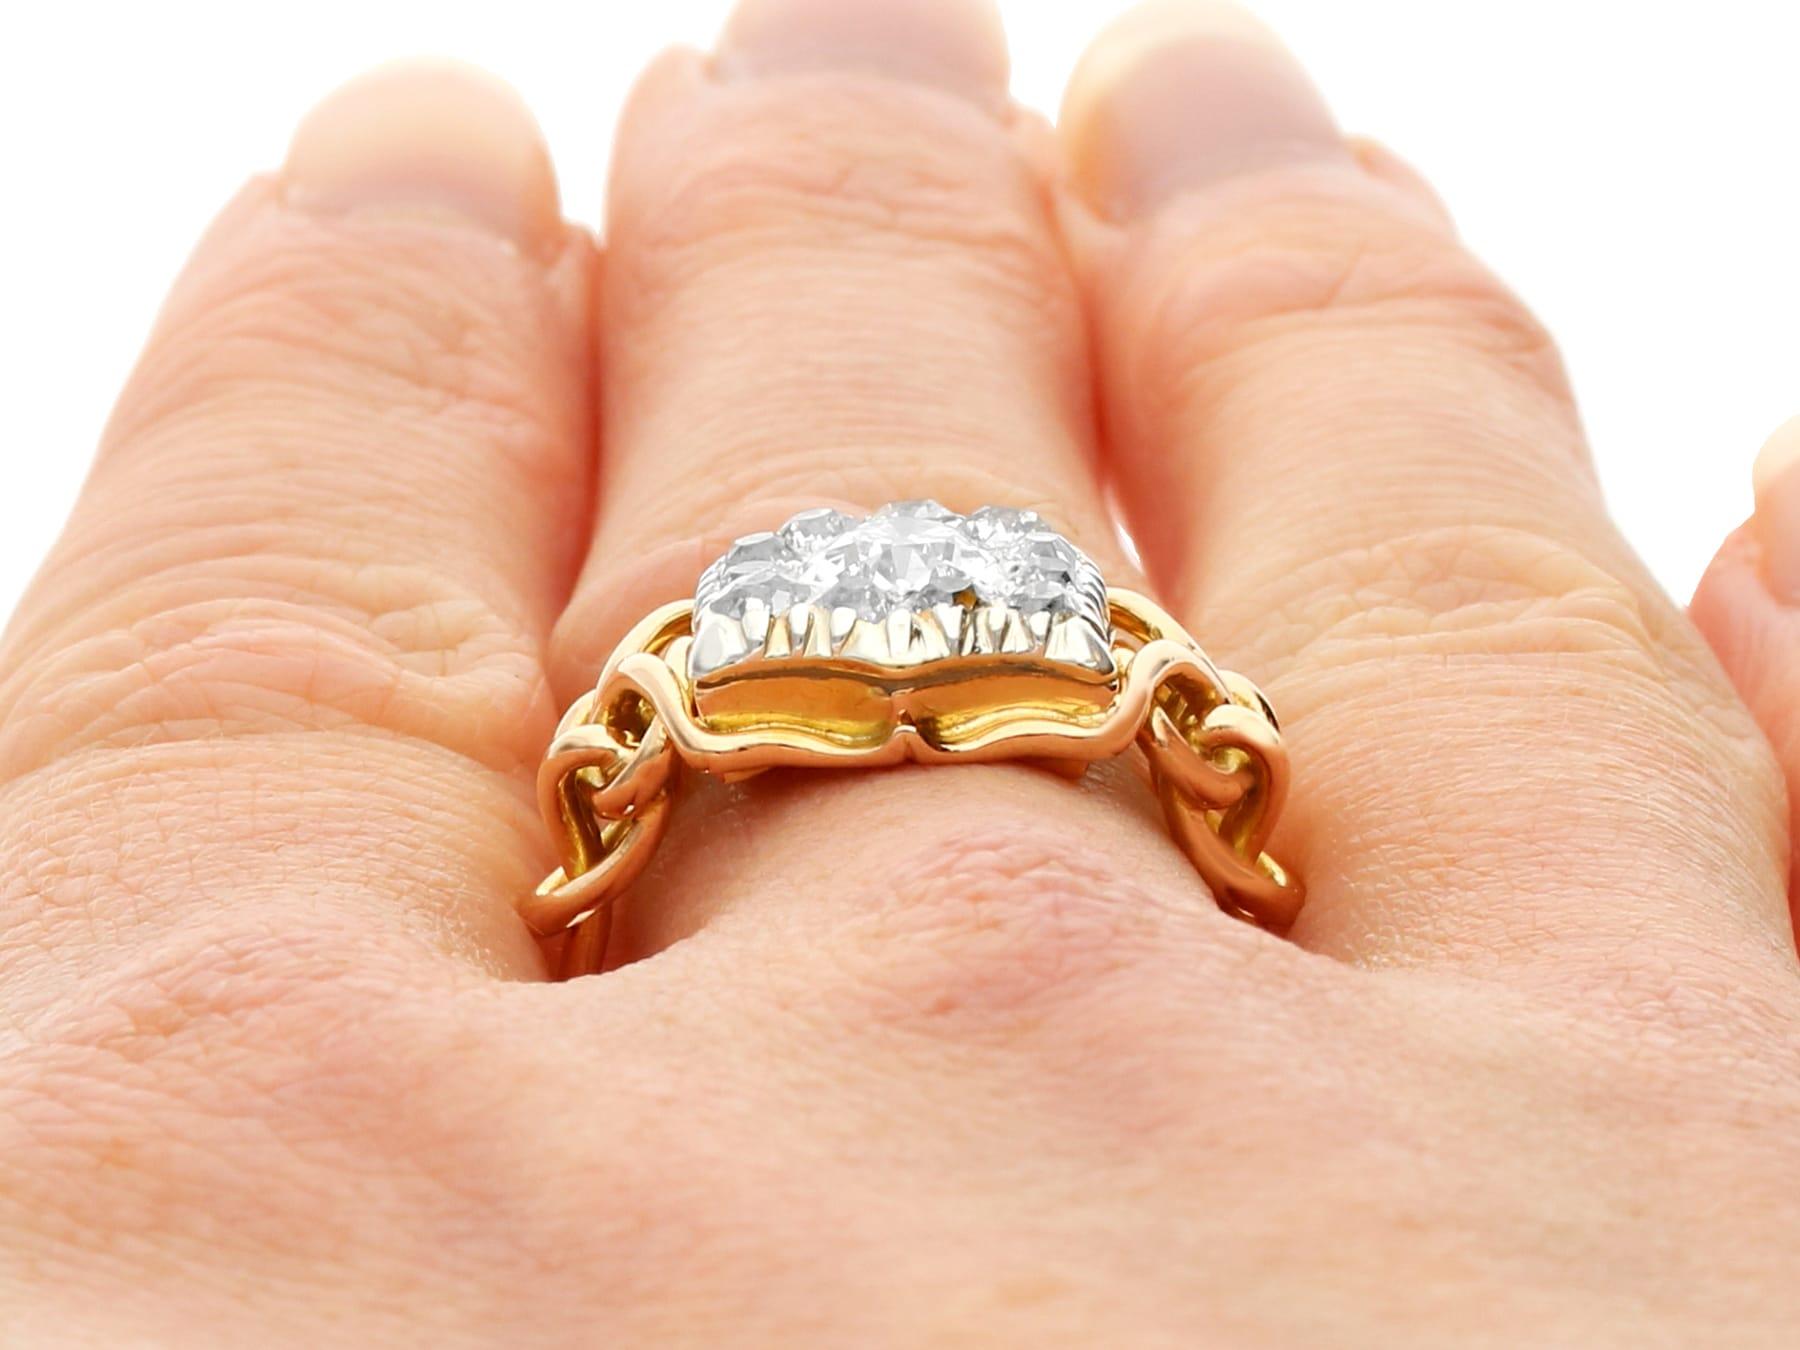 Antique 2.05 Carat Diamond and Yellow Gold Dress Ring  For Sale 2